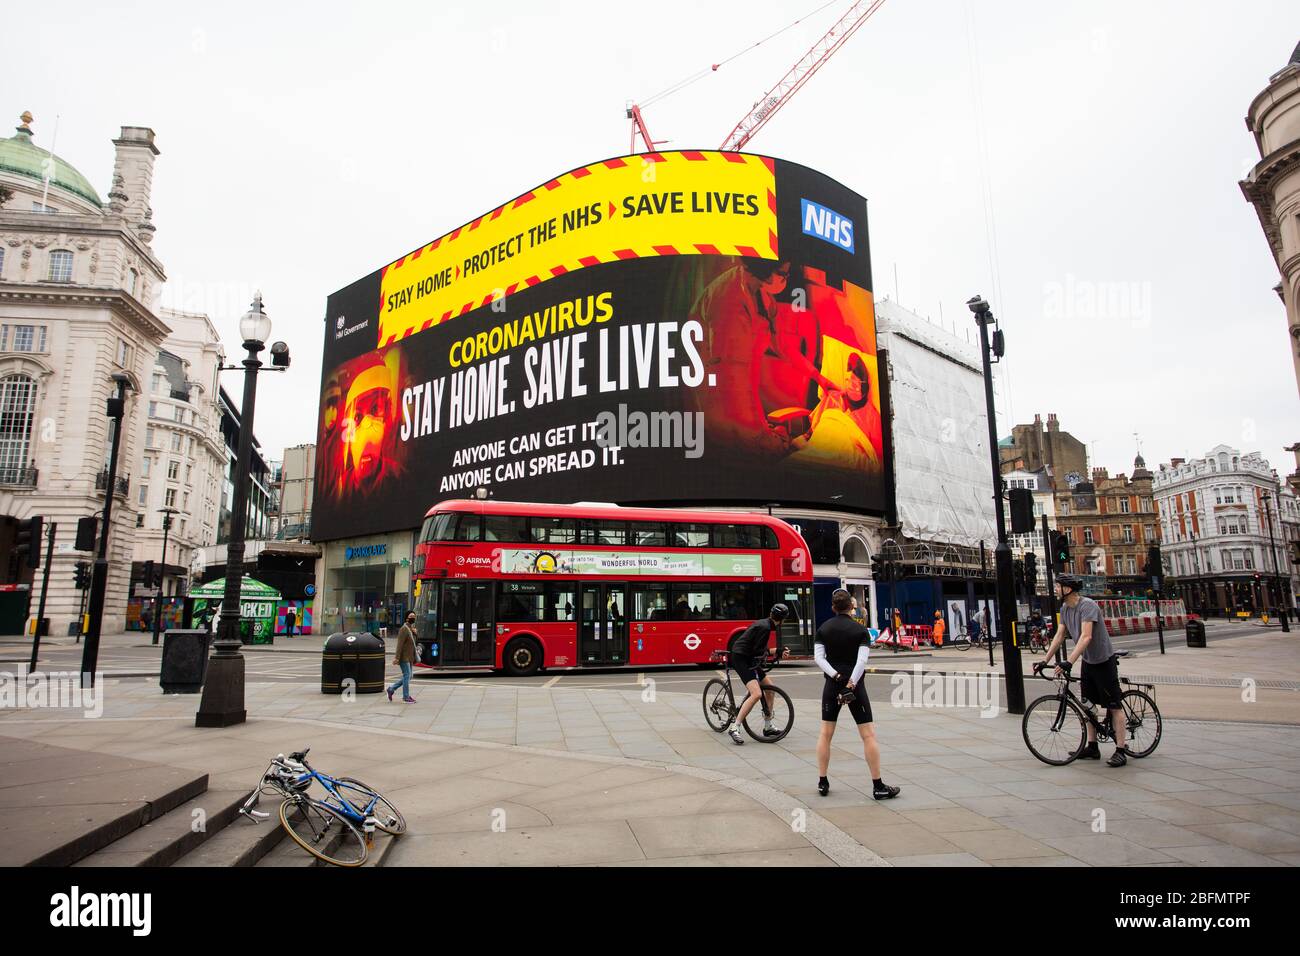 Stay Home. Protect the NHS. Save Lives. A message from the british government is displayed on the advertising screen in piccadilly circus, central Lon Stock Photo